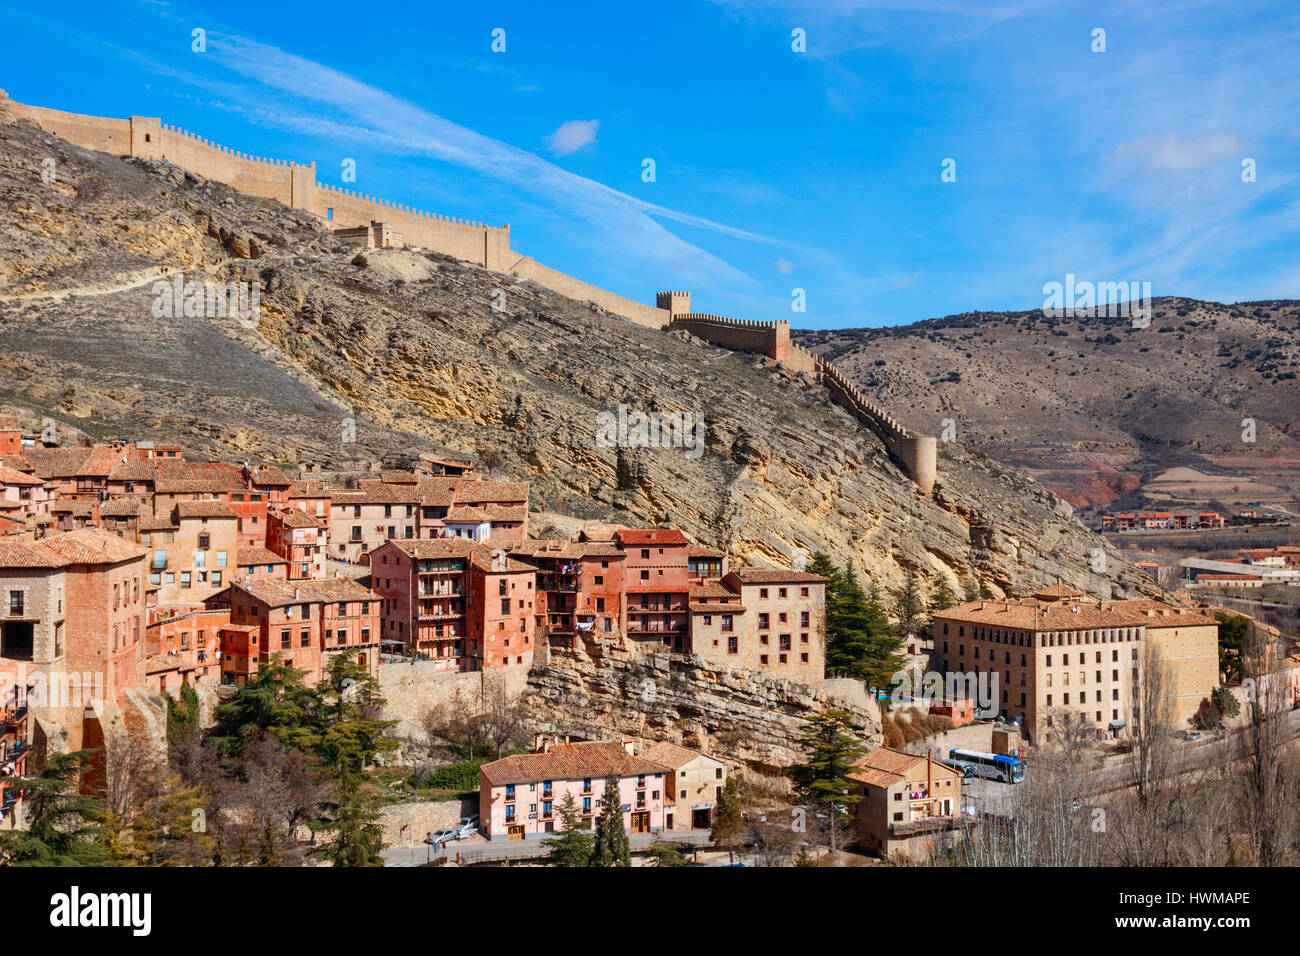 View over Albarricin, its city walls and the valley on a sunny day with a blue sky. Albarracin is located in the province of Teruel, Spain. Stock Photo